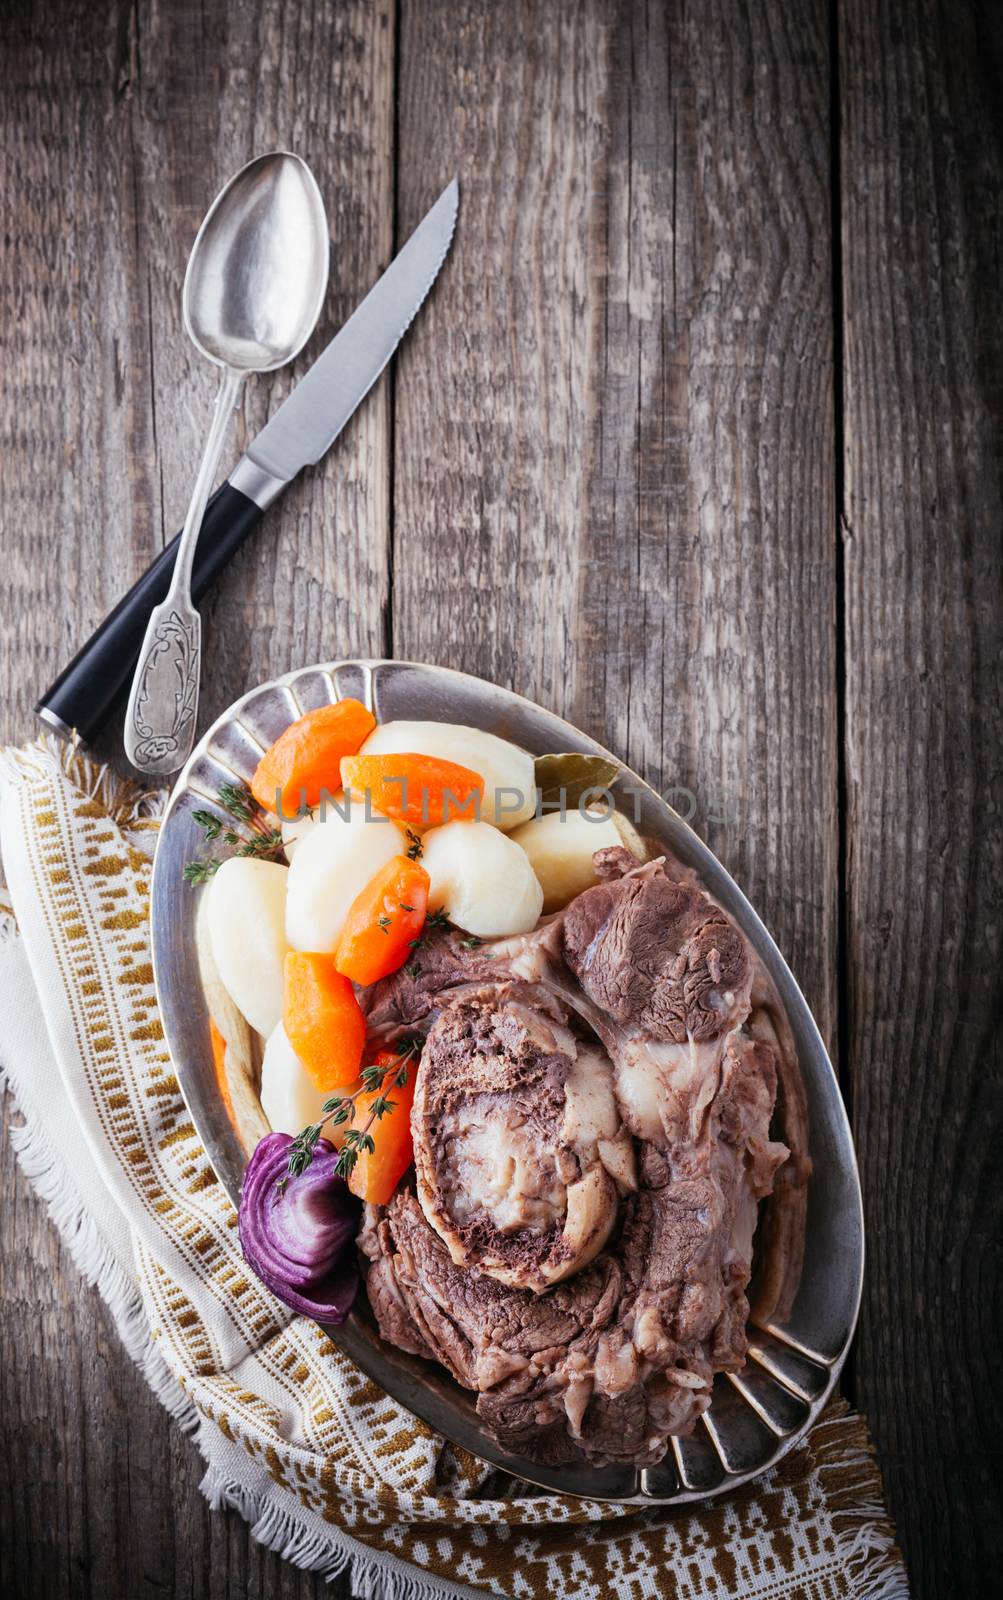 Pot-Au-Feu - French beef stew with knife and fork